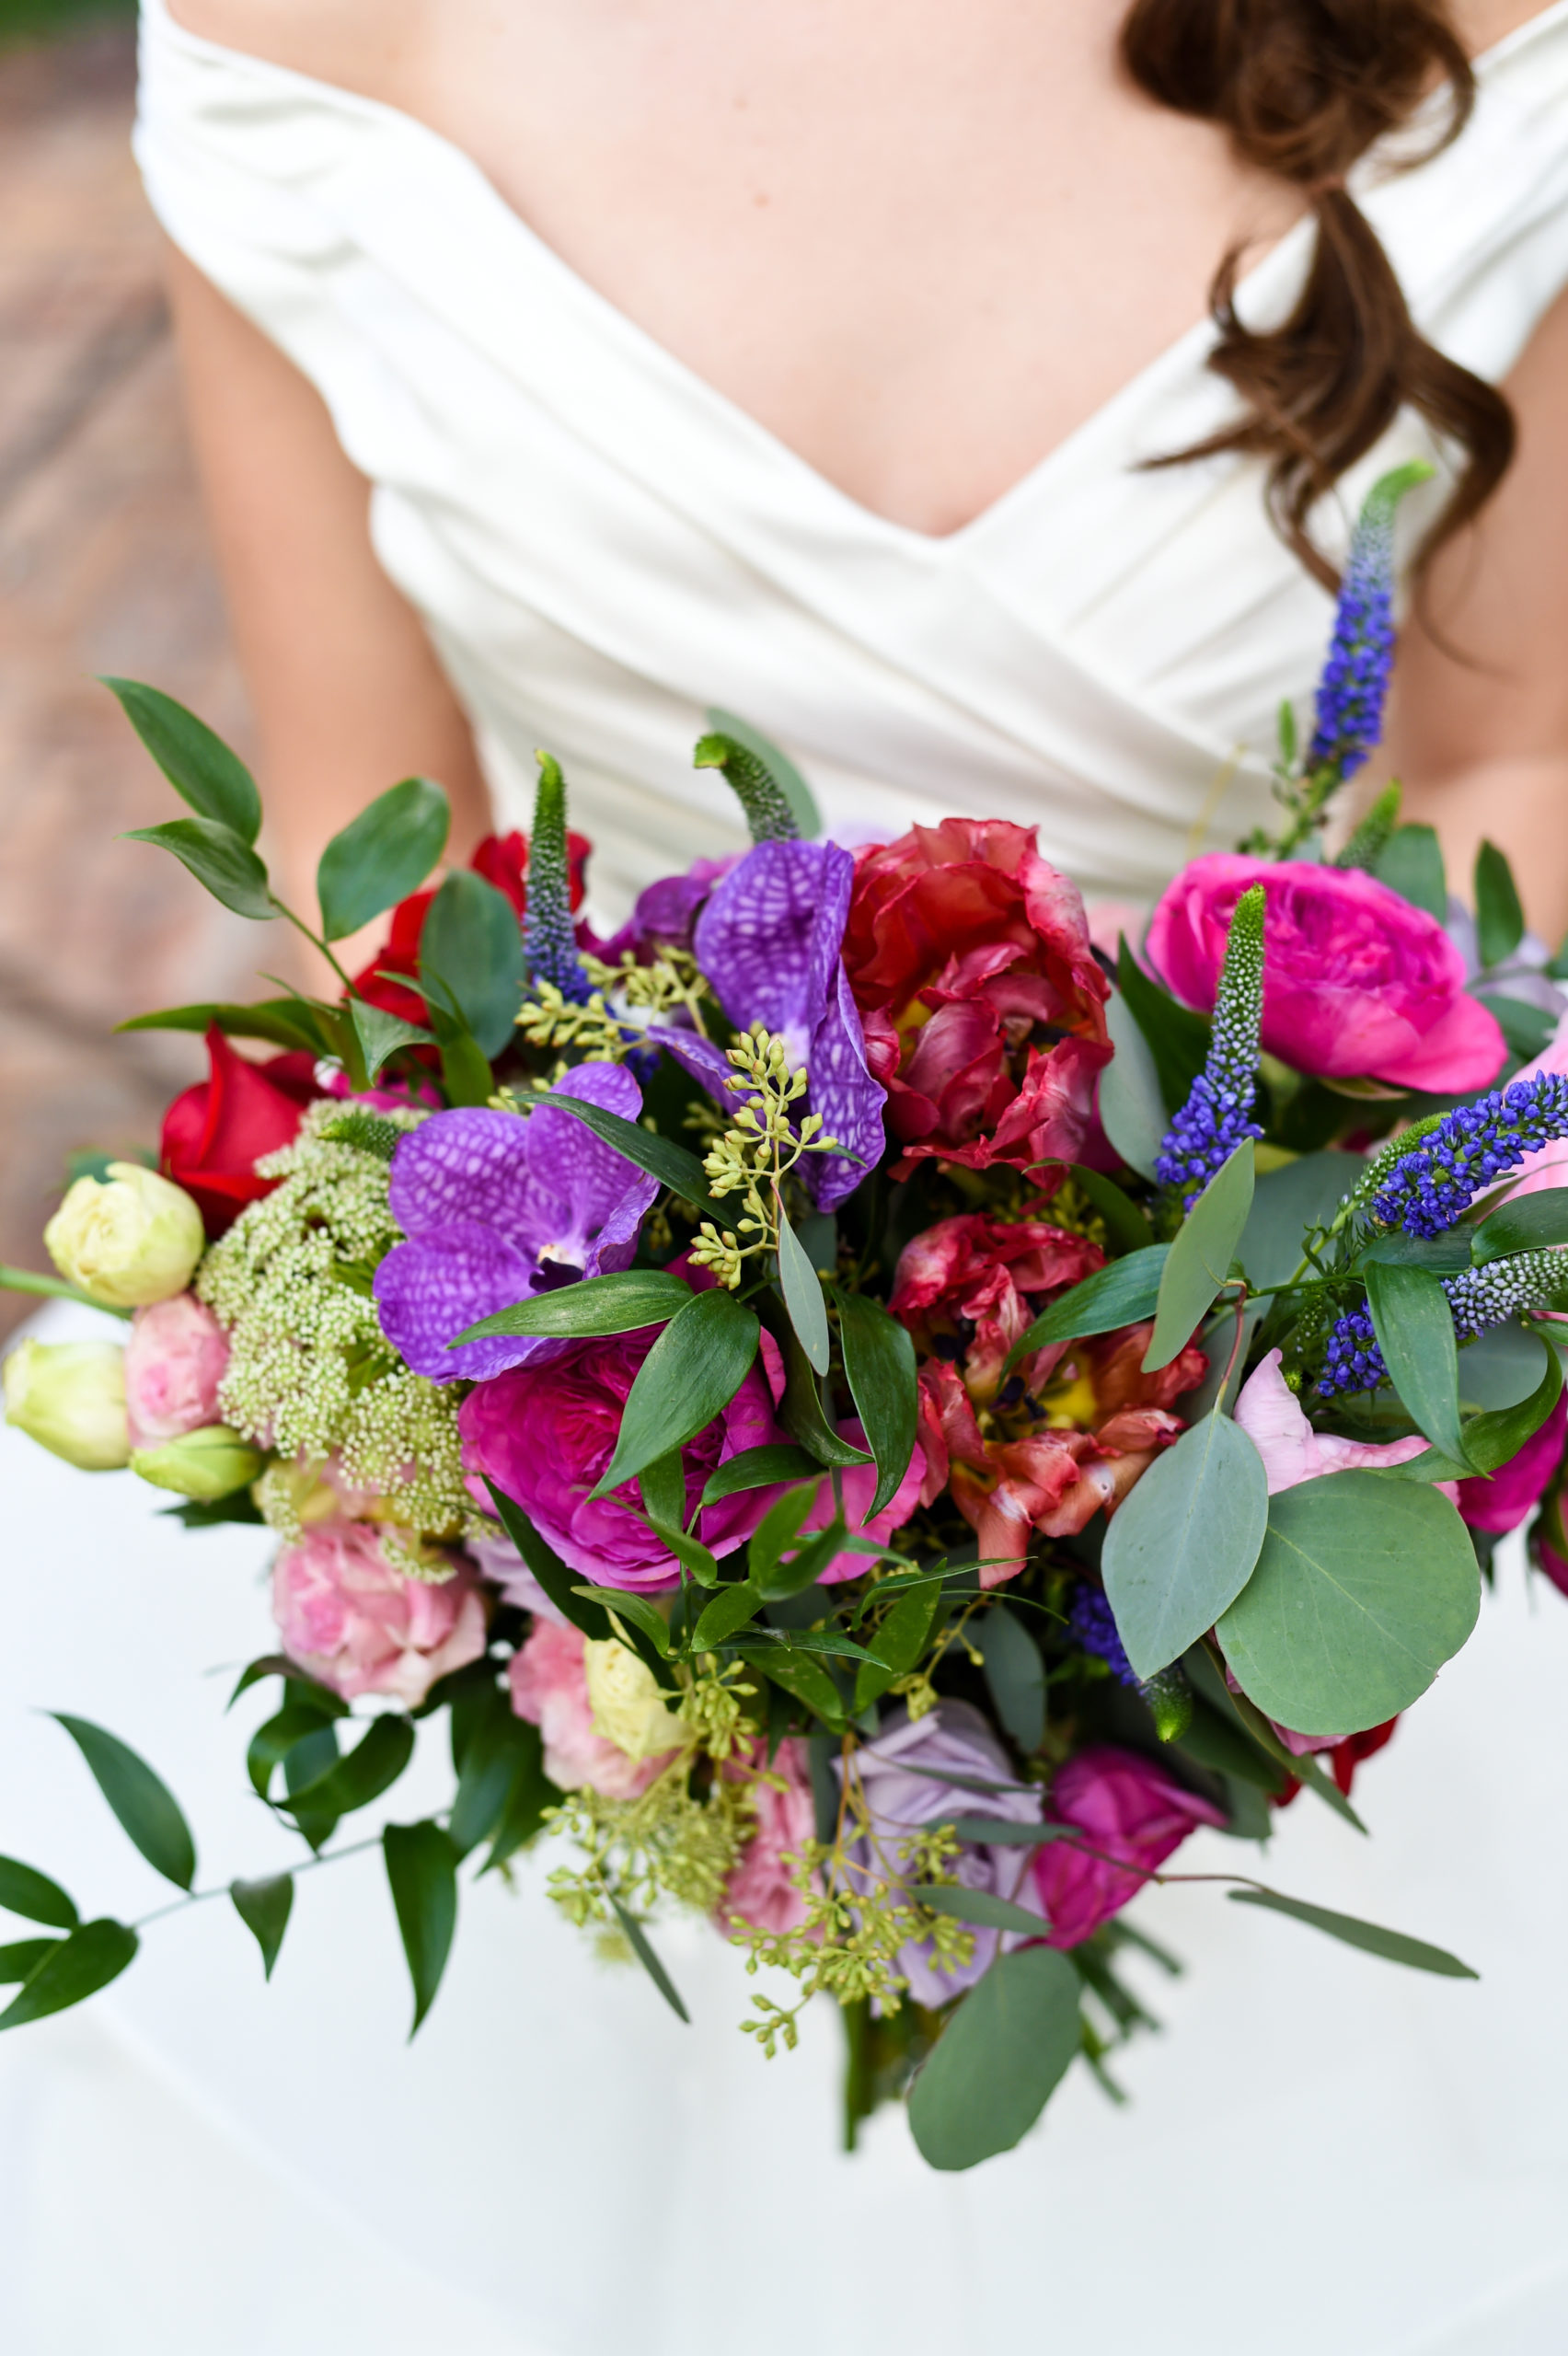 This purple and fuchsia bouquet made a statement